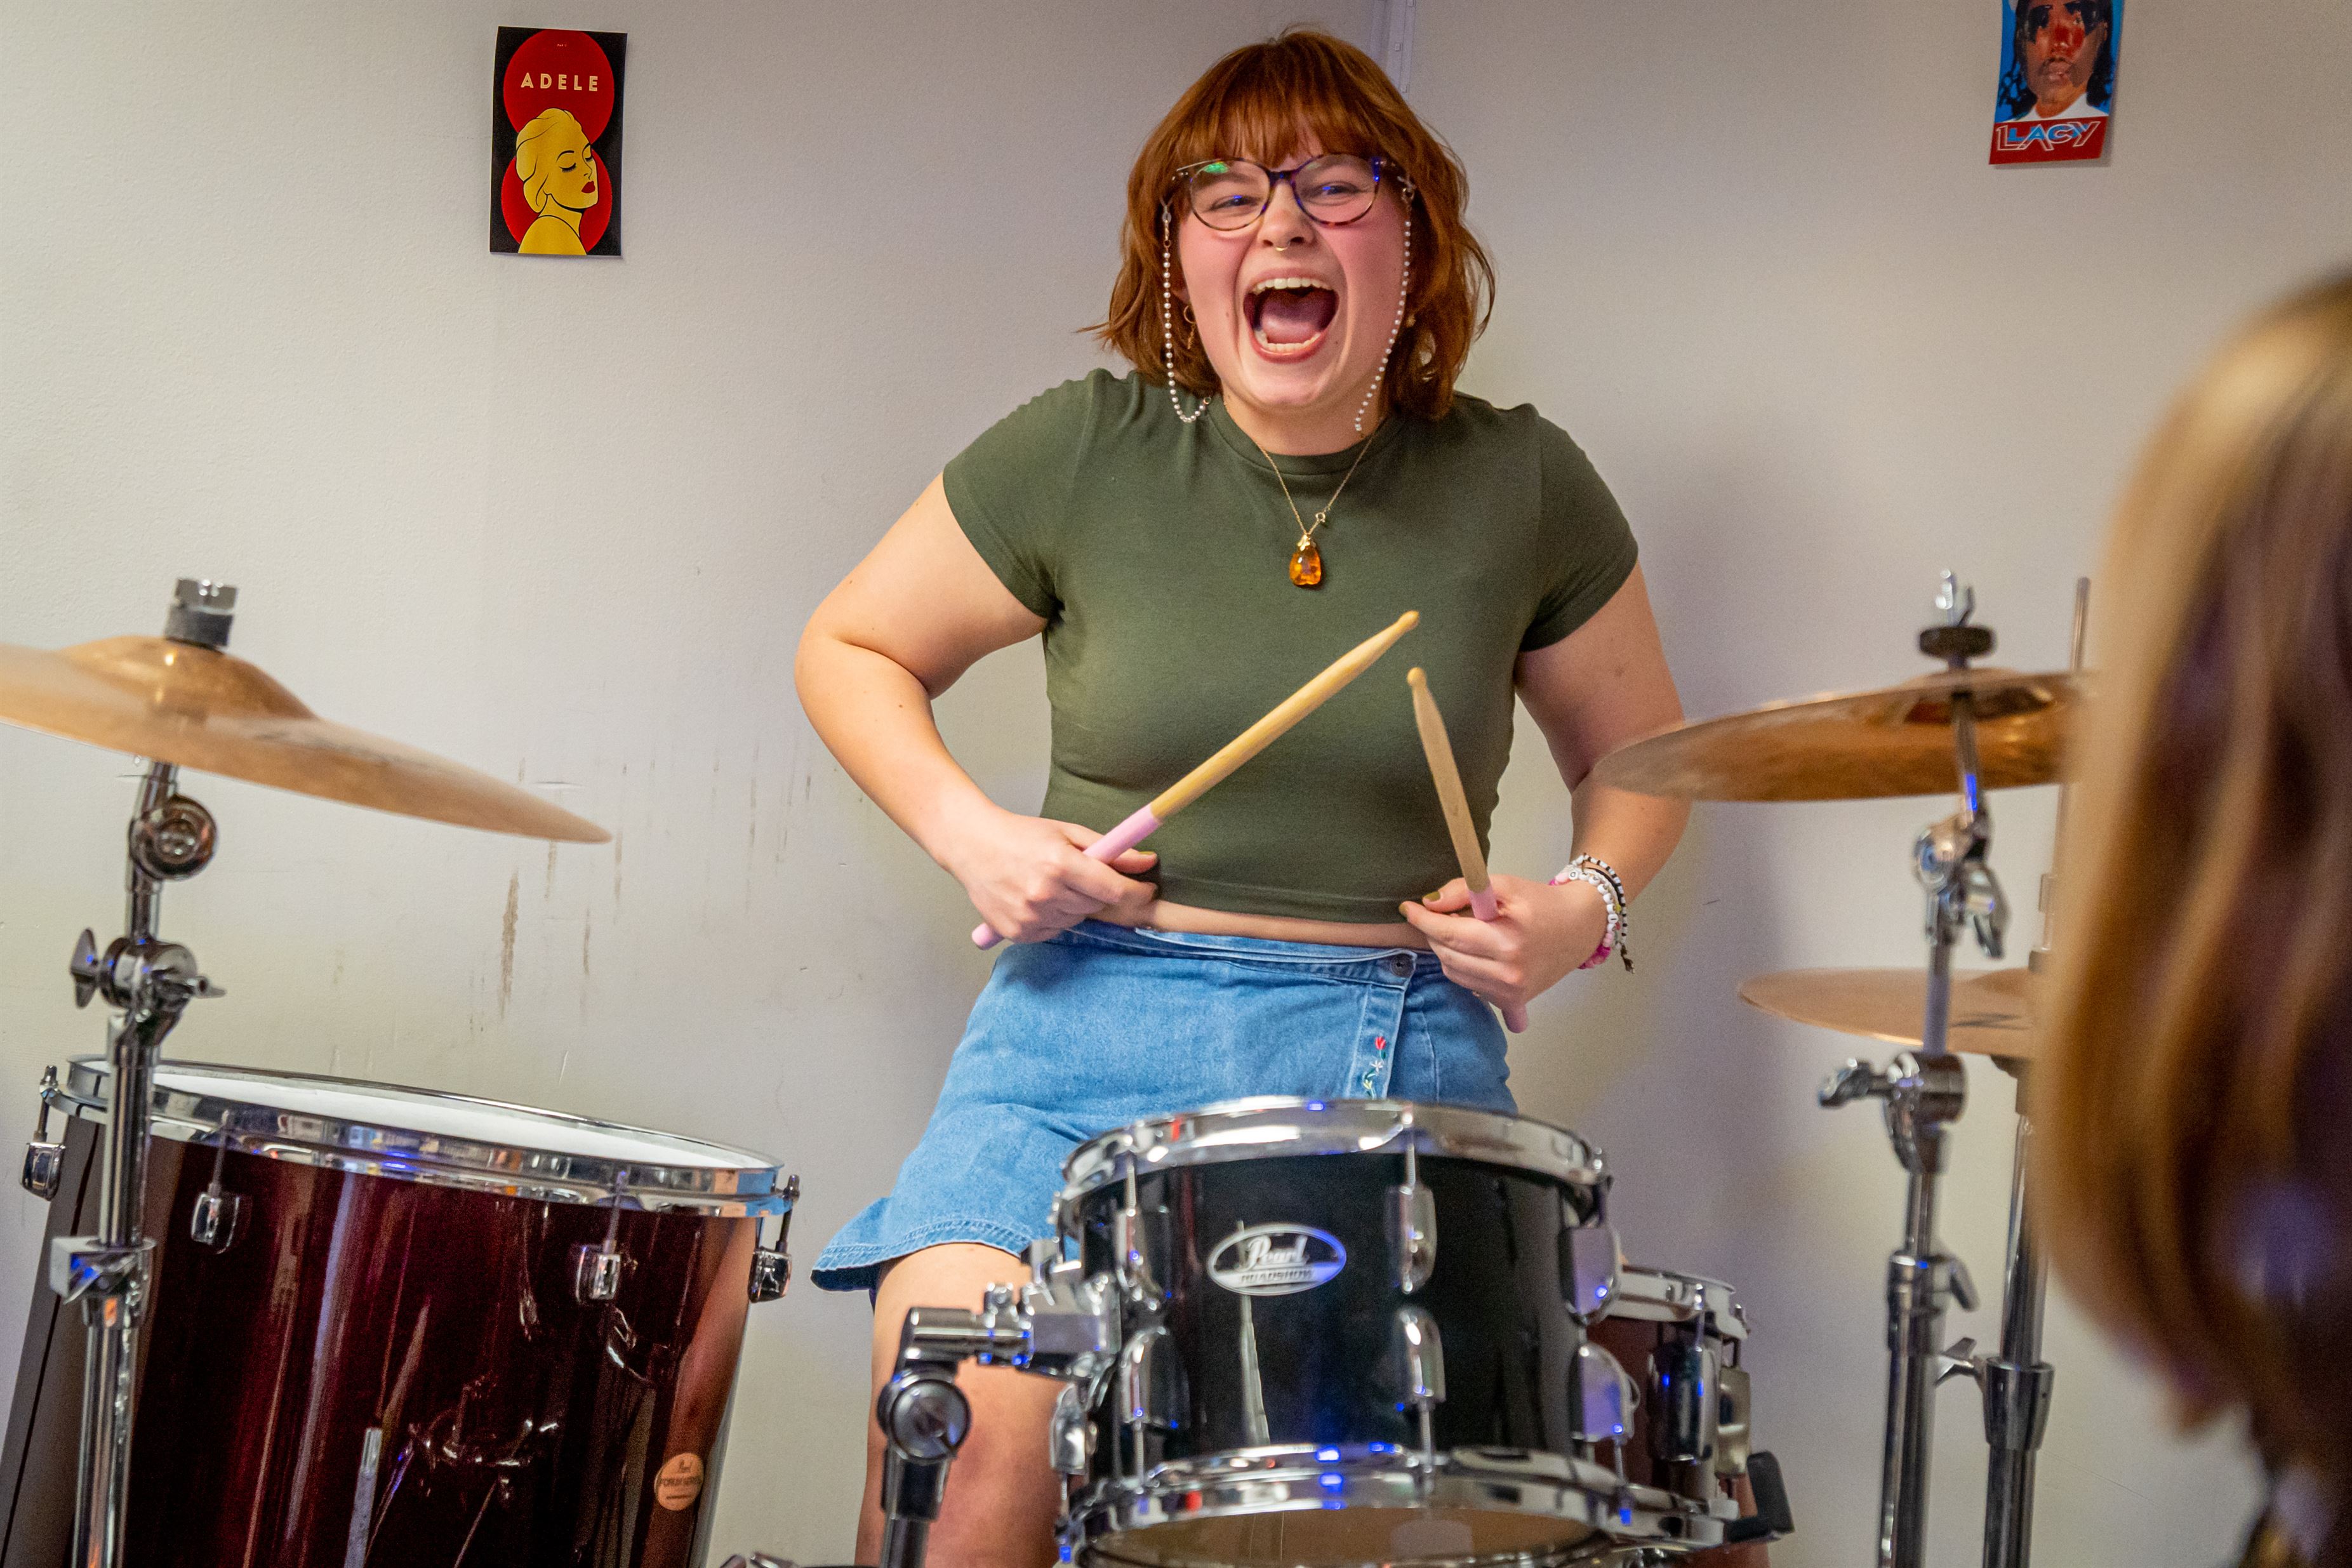 Allie Volltrauer, a sophomore theatre education major, plays the drums with excitement. 
Lynise Olivacce | The Montclarion